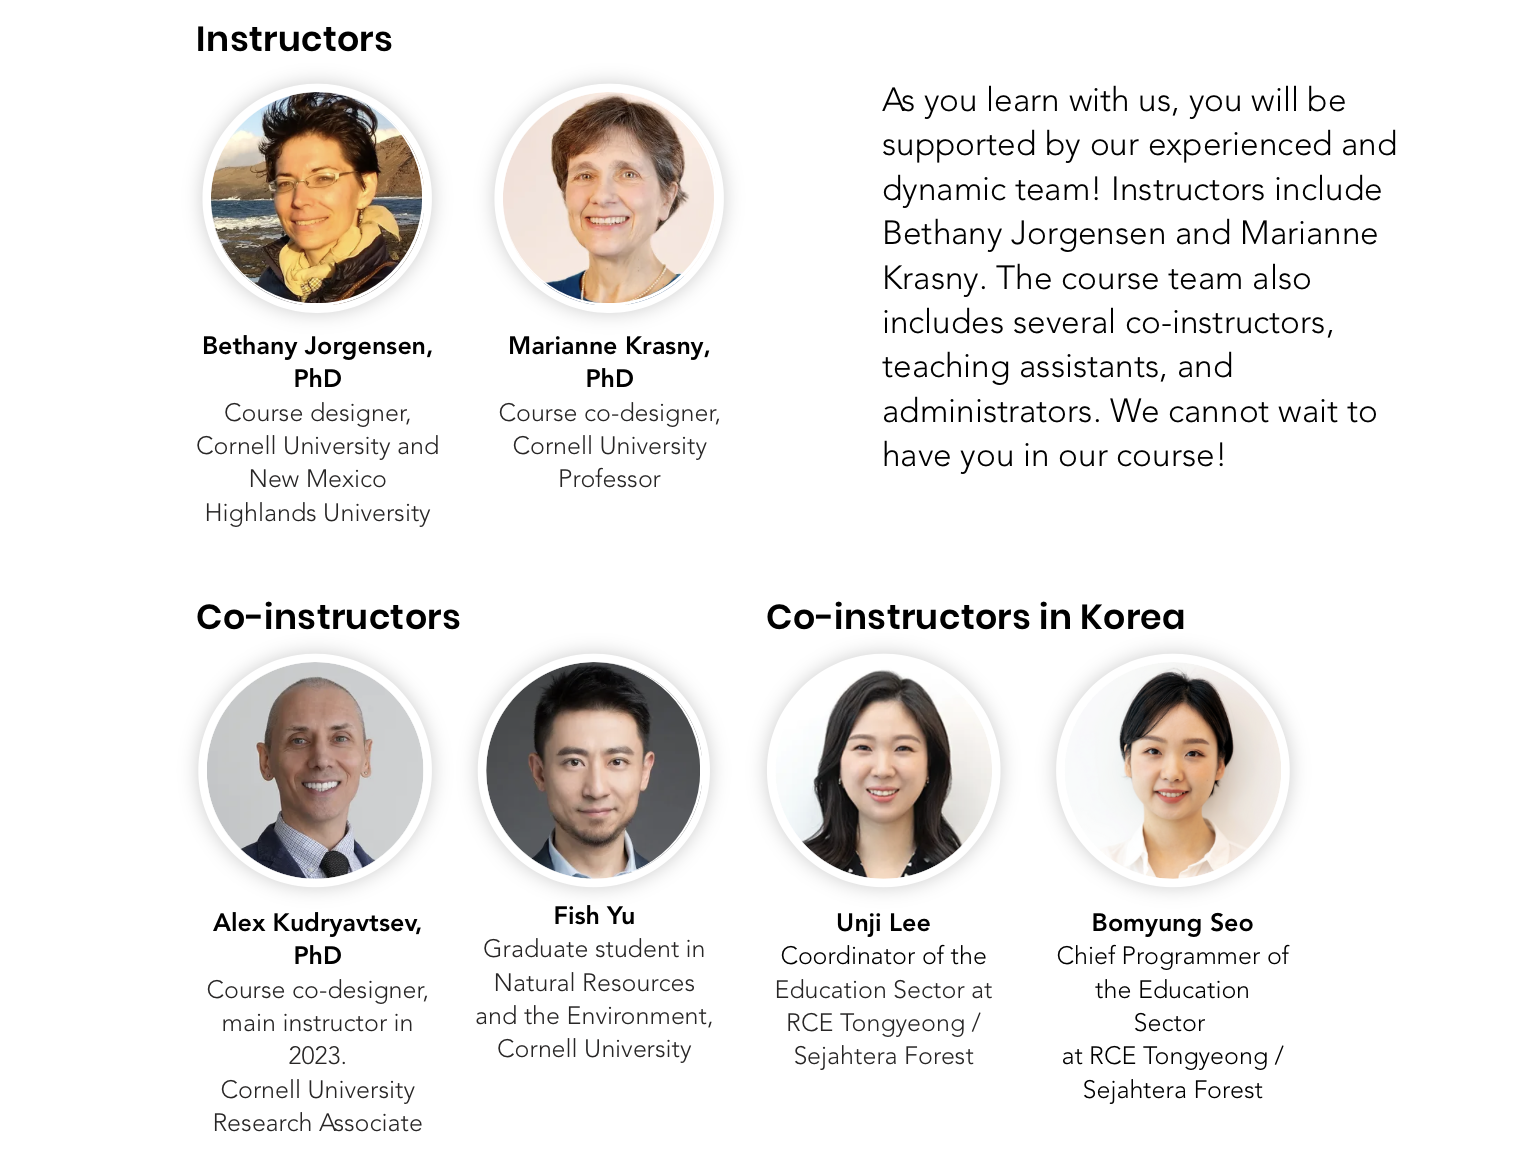 Profile photos of Instructors Bethany Jorgensen PhD, Marianne Krasny PhD; Co-instructors Alex Kudryavtsev PhD, Fish Yu; Co-instructors in Korea Unji Lee and Bomyung Seo. Text aligned right says, "As you learn with us, you will be supported by our experienced and dynamic team! Instructors include Bethany Jorgensen and Marianne Krasny. The course team also includes several co-instructors, teaching assistants, and administrators. We cannot wait to have you in our course!"